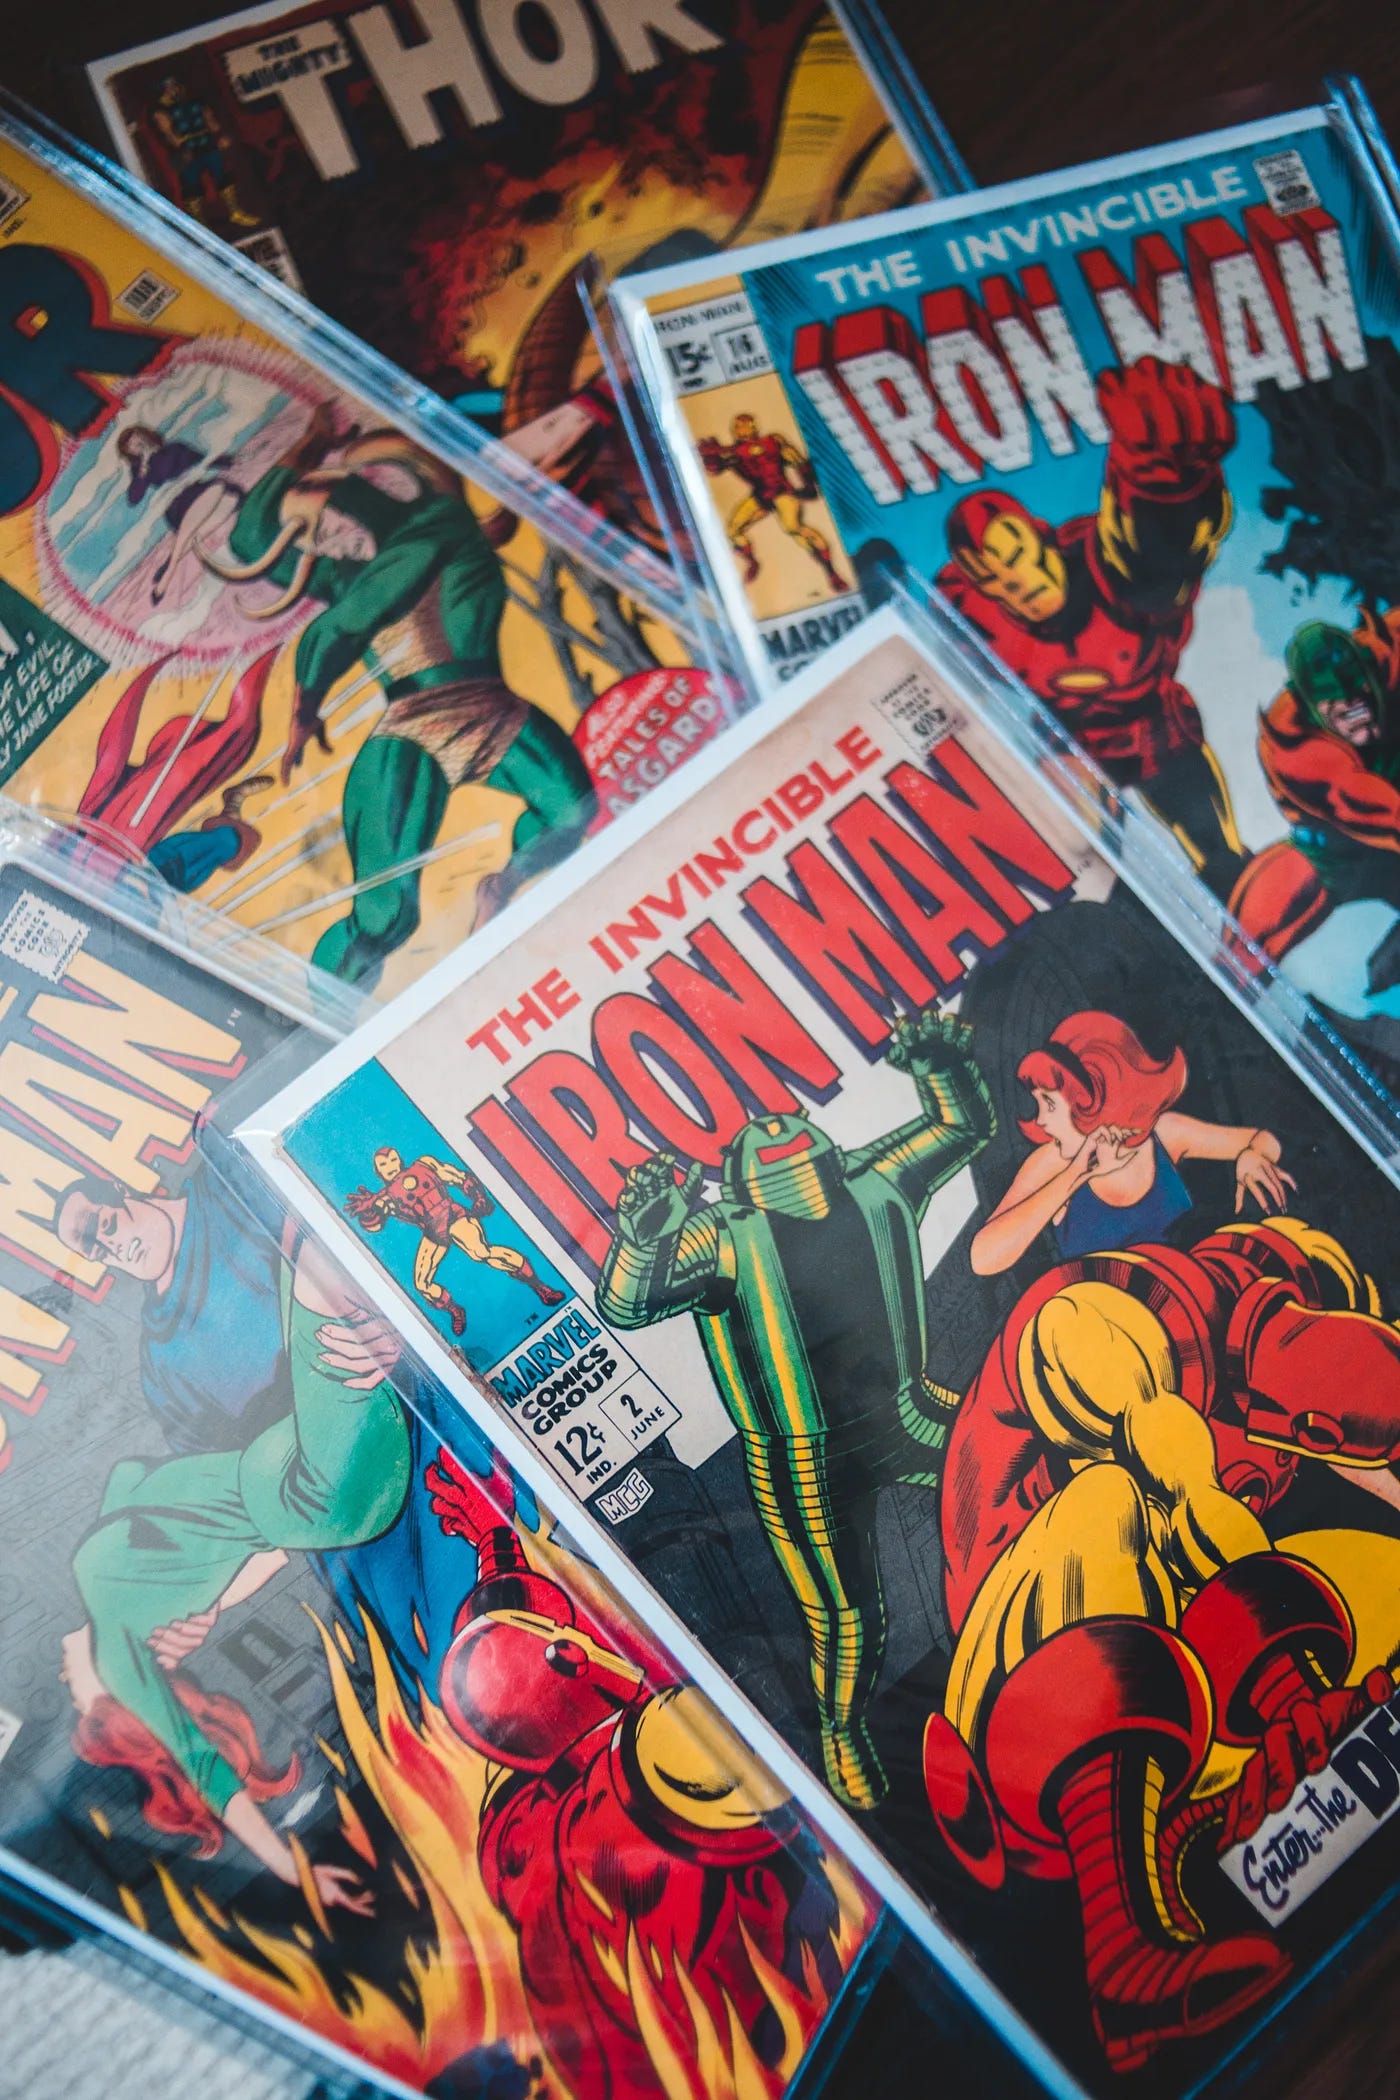 A collection of Marvel comic books